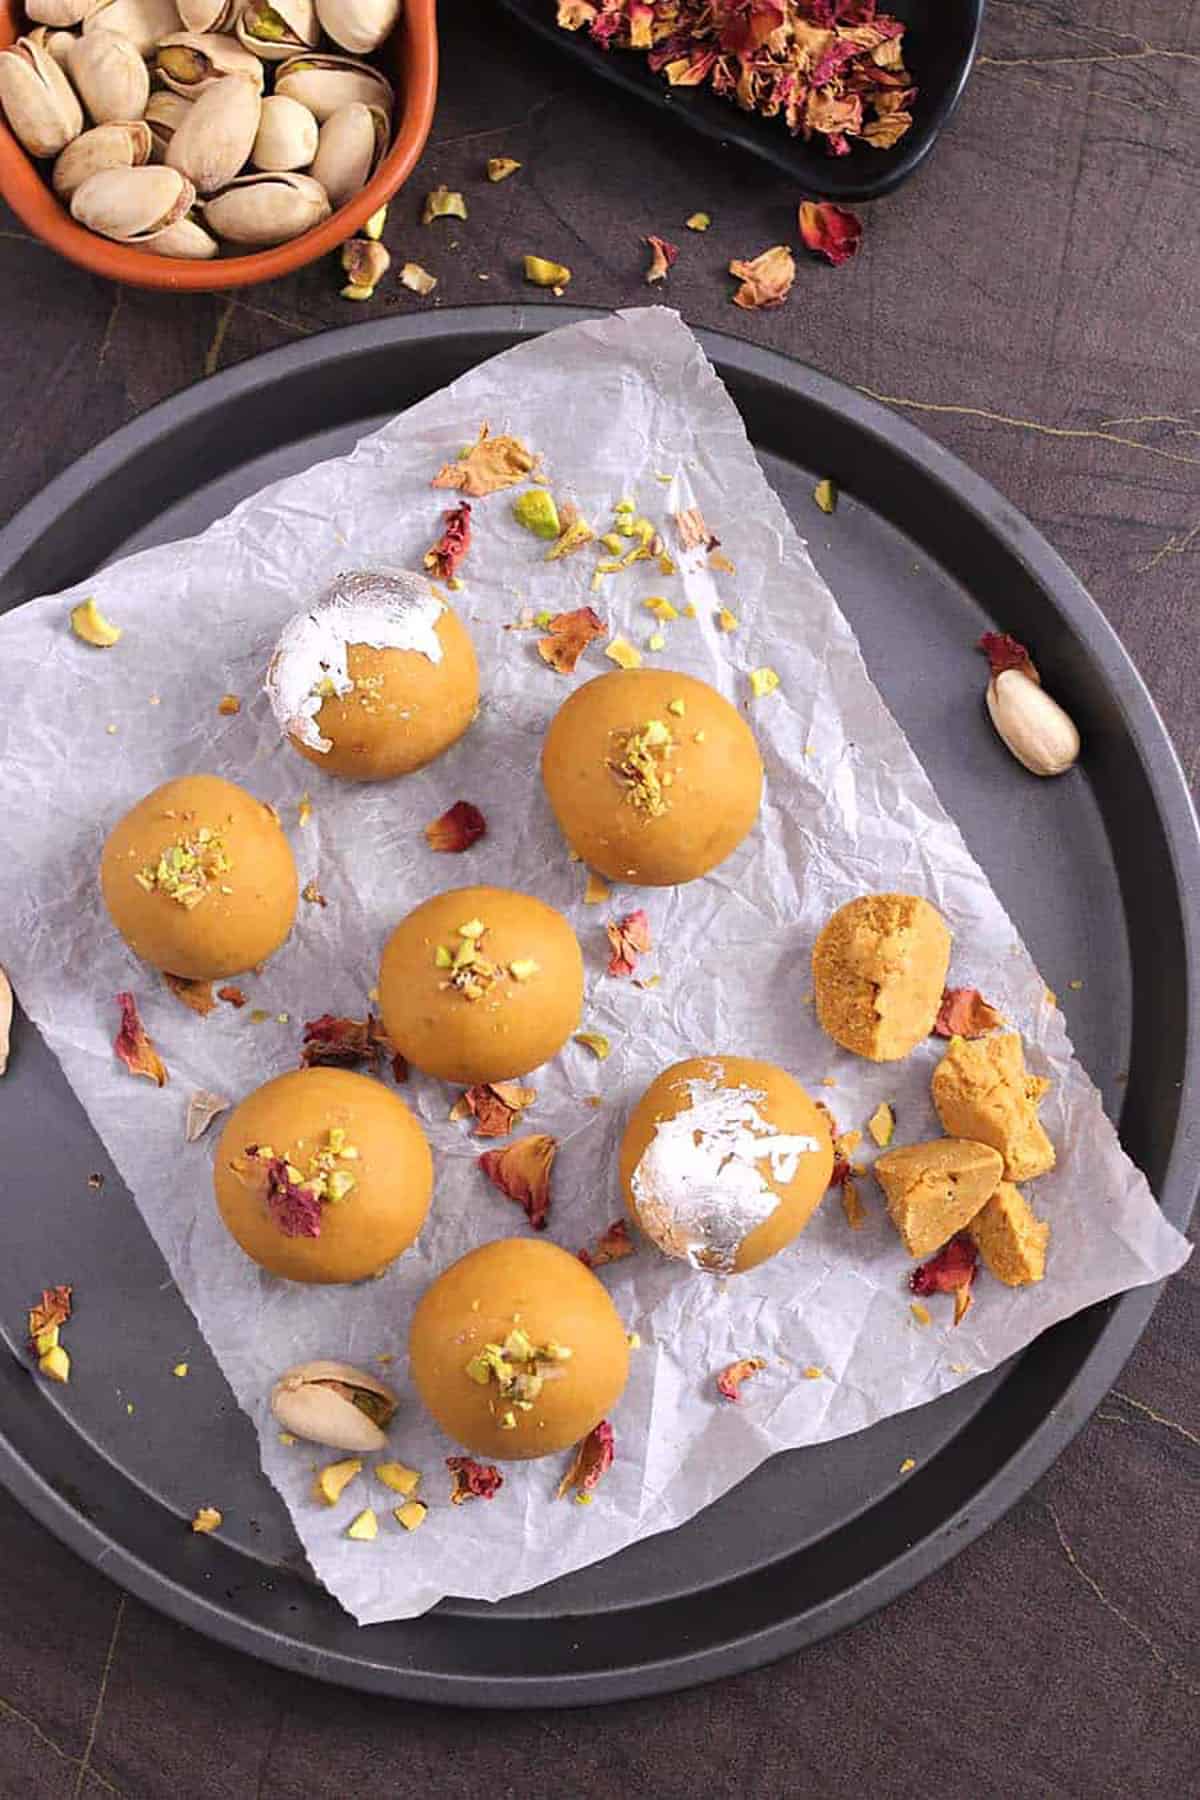 Top view of Besan Ladoo garnished with rose petals, crushed pistachios., and edible silver leaves or varq.